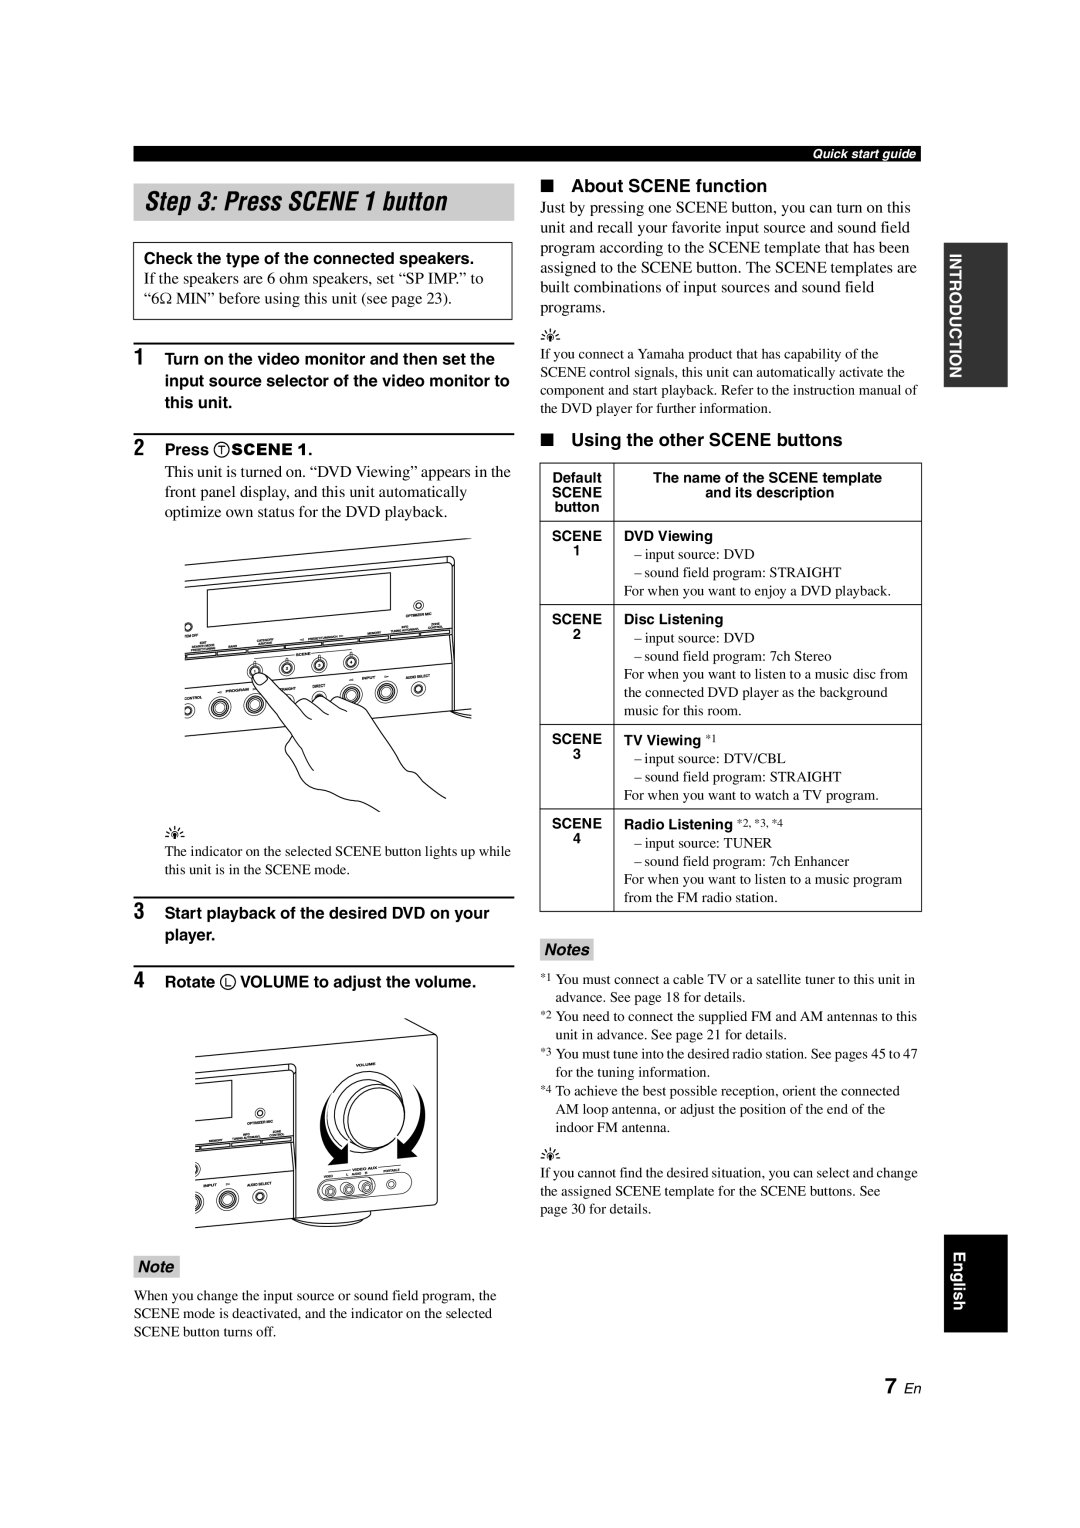 Yamaha HTR-6150 owner manual 7 En, About SCENE function, Using the other SCENE buttons, Press SCENE 1 button, Notes 